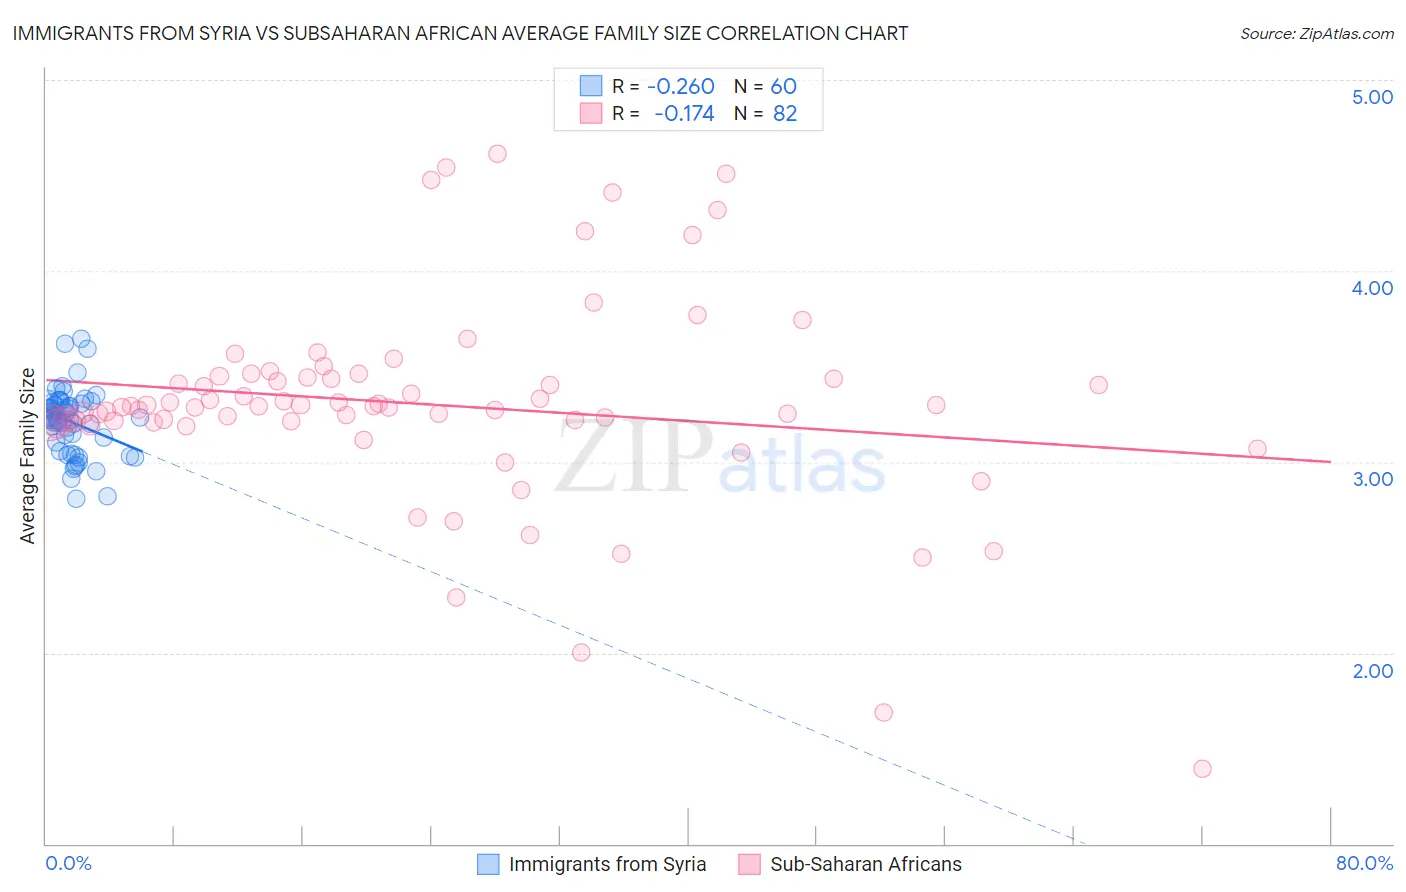 Immigrants from Syria vs Subsaharan African Average Family Size